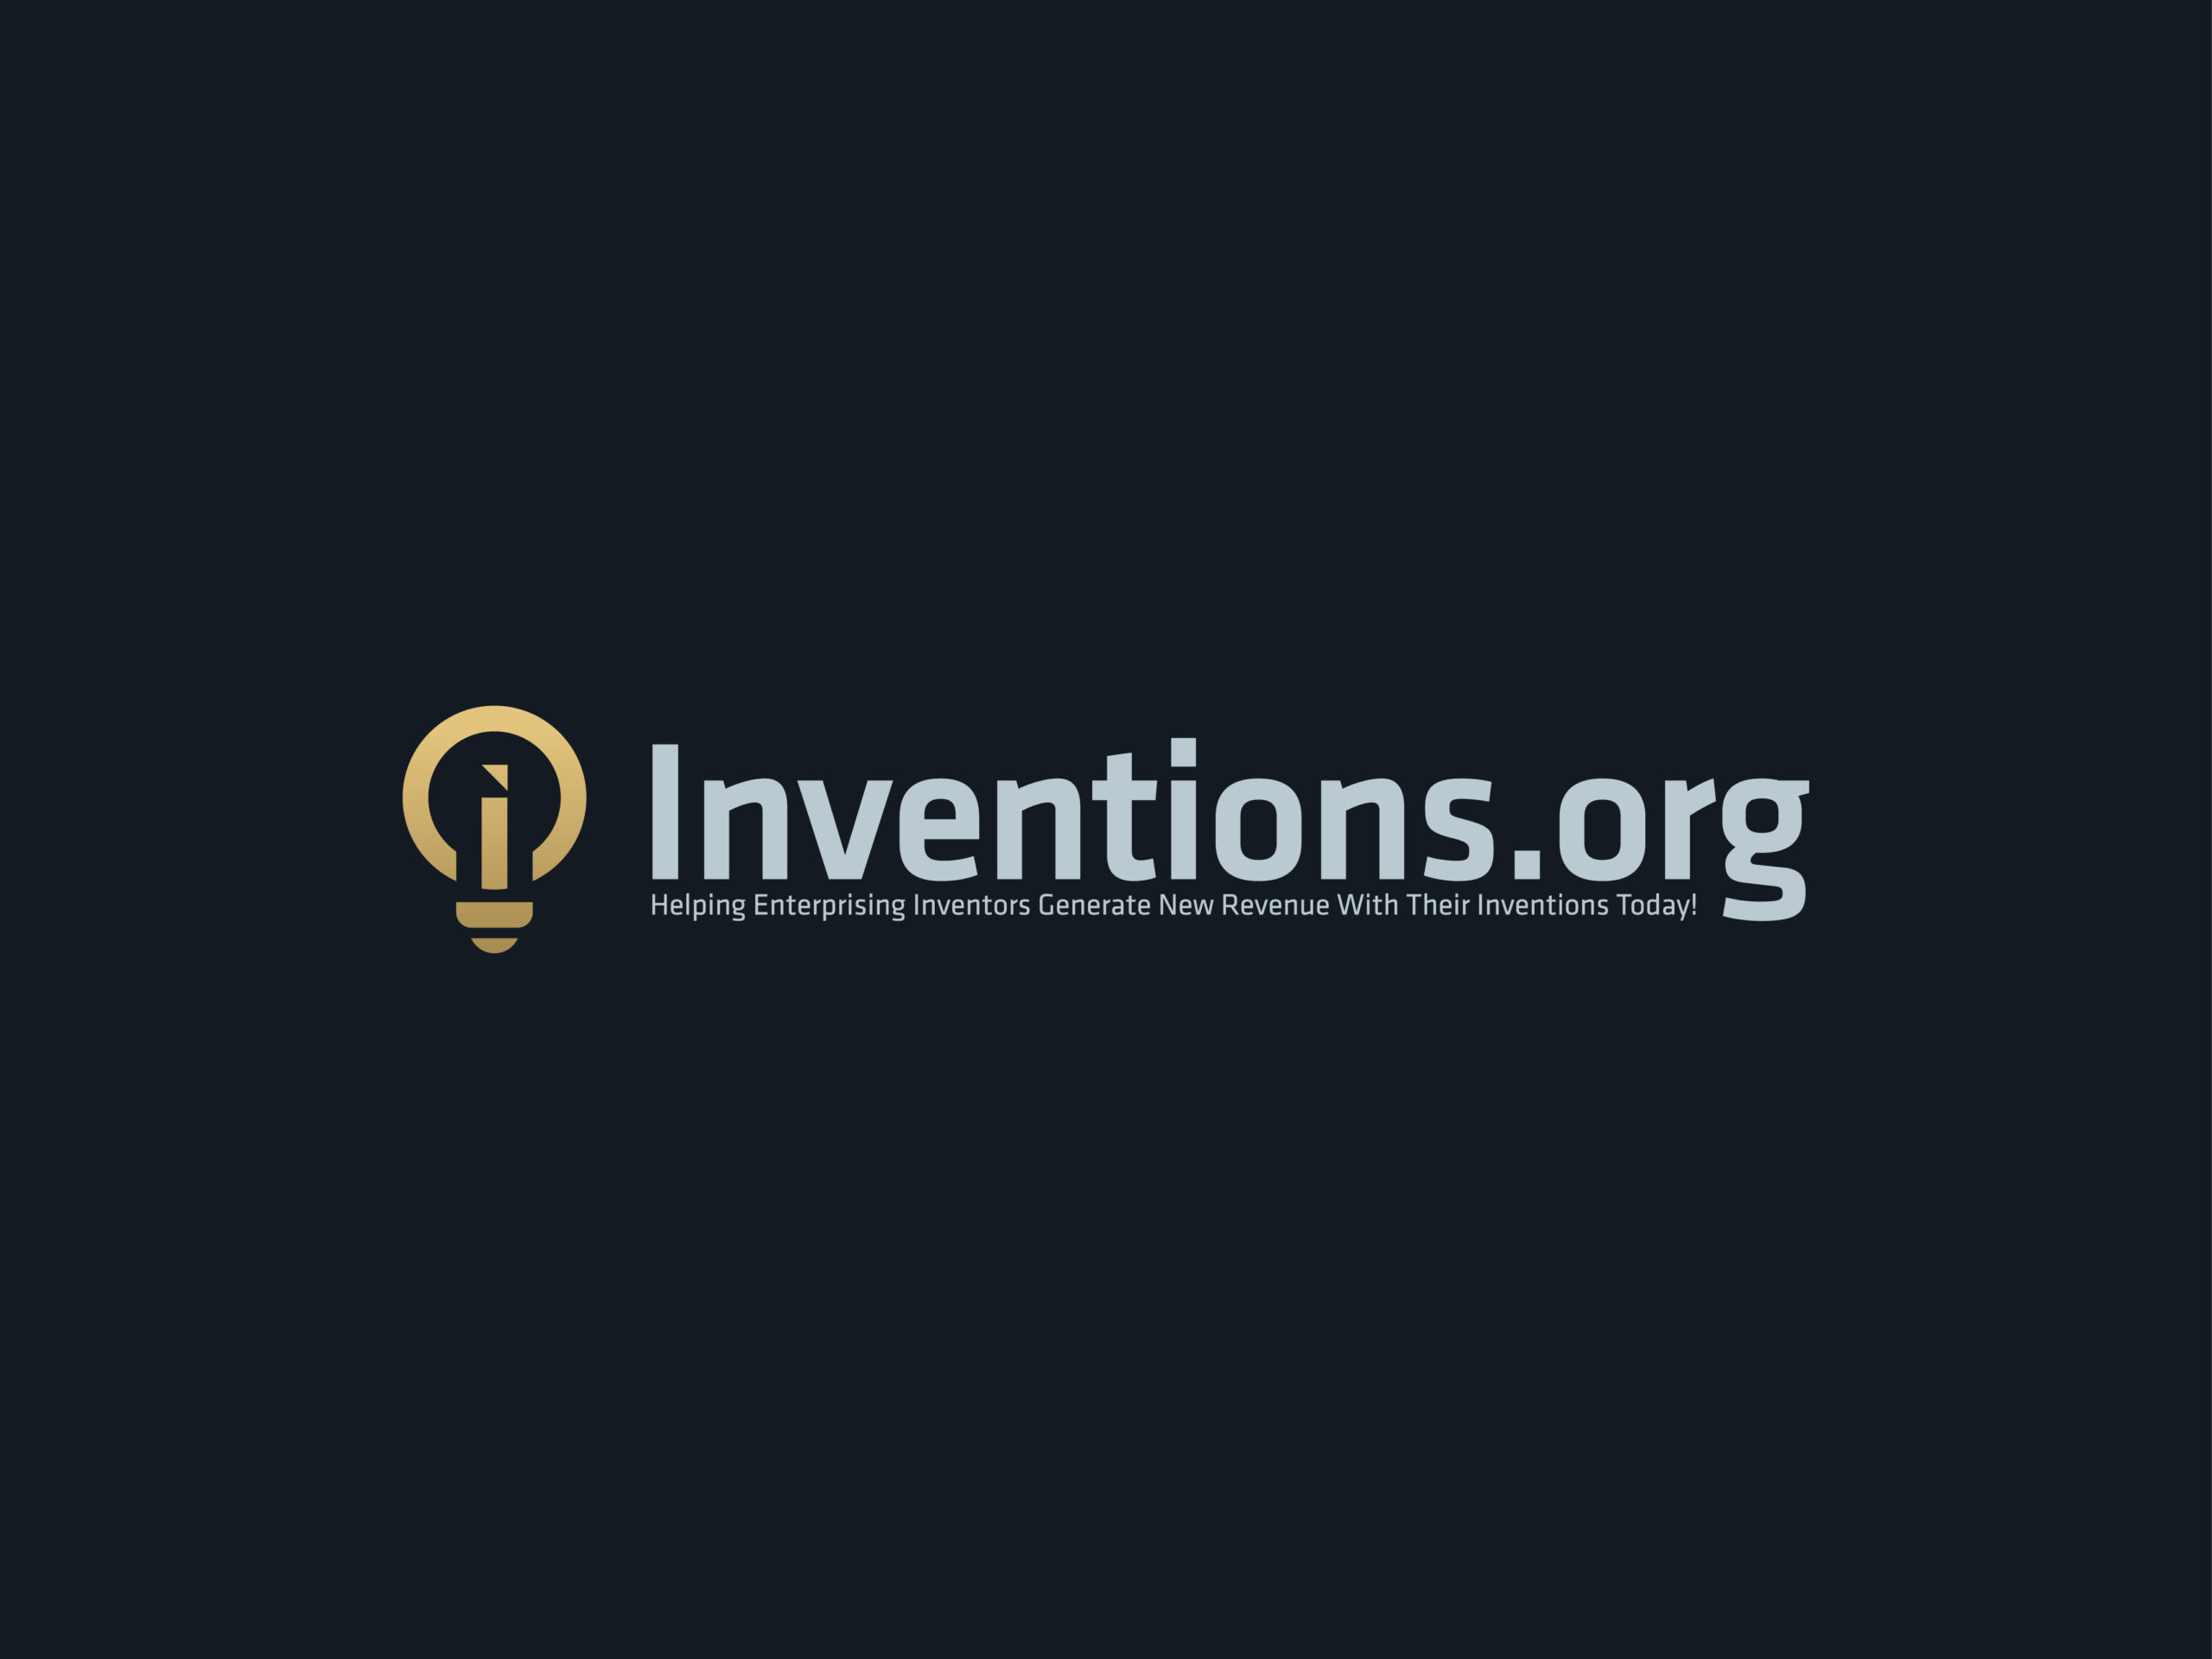 (c) Inventions.org